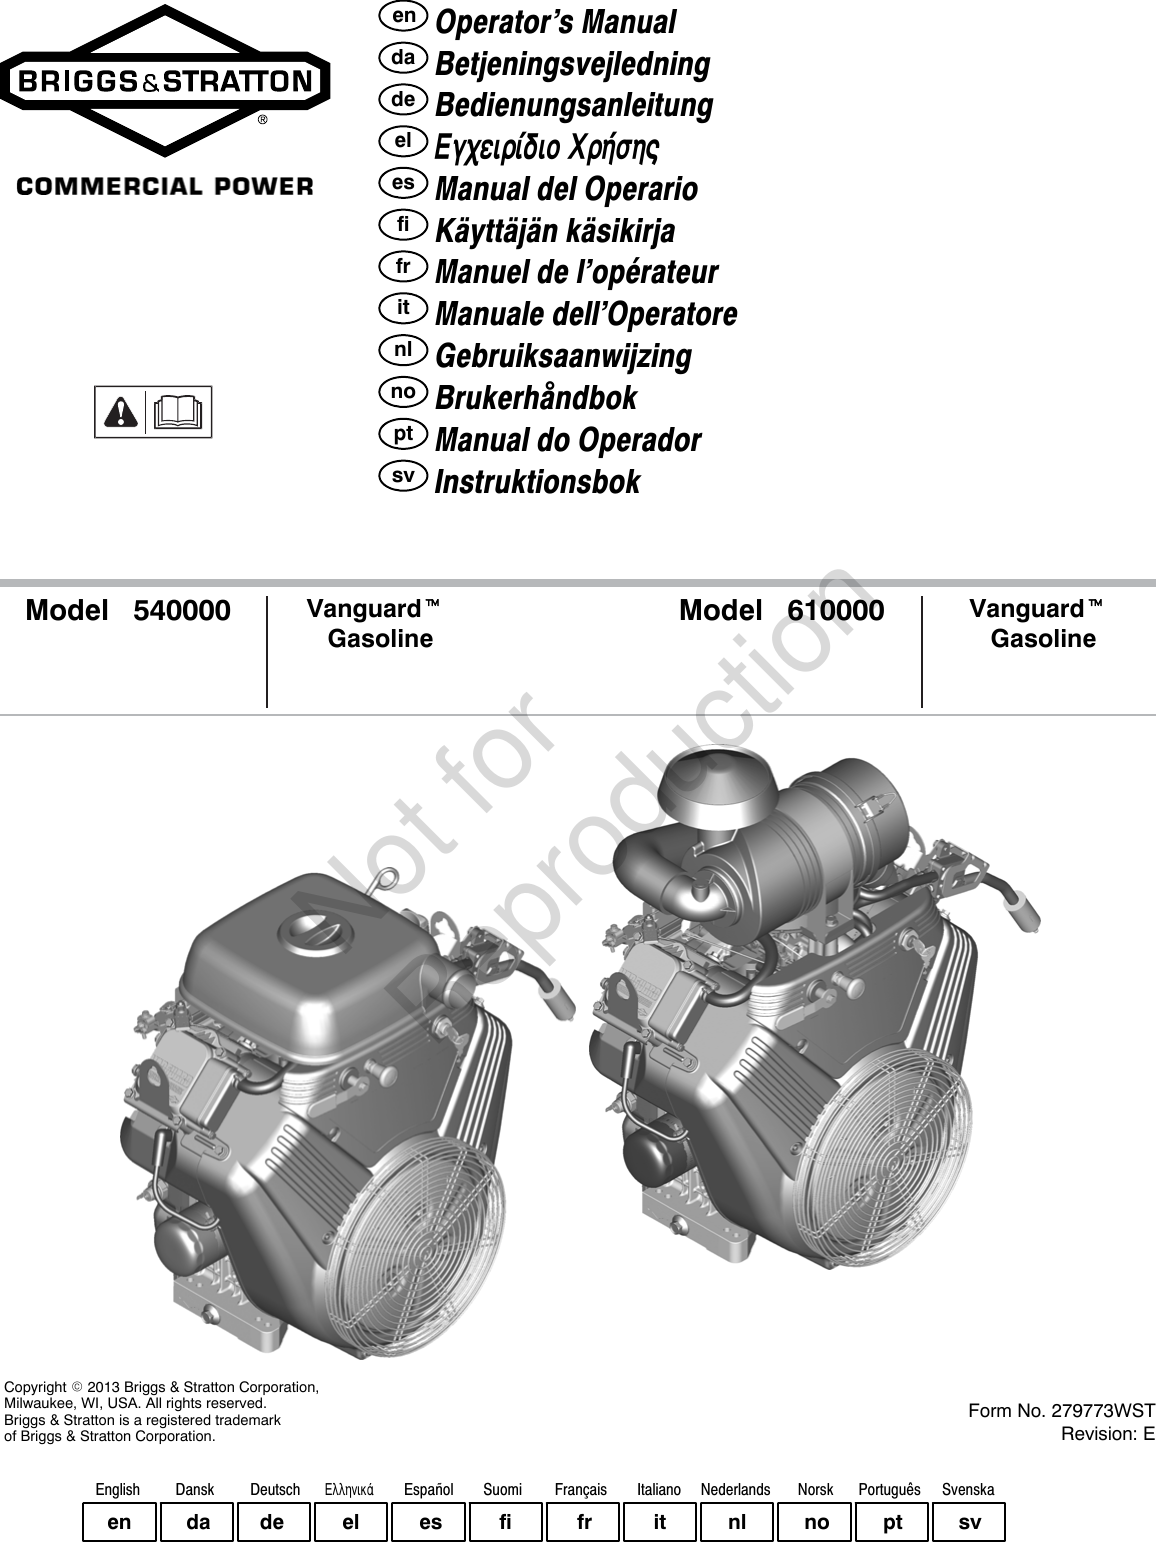 Briggs And Stratton Outboard Motor 540000 Users Manual 279773WST_E_LO